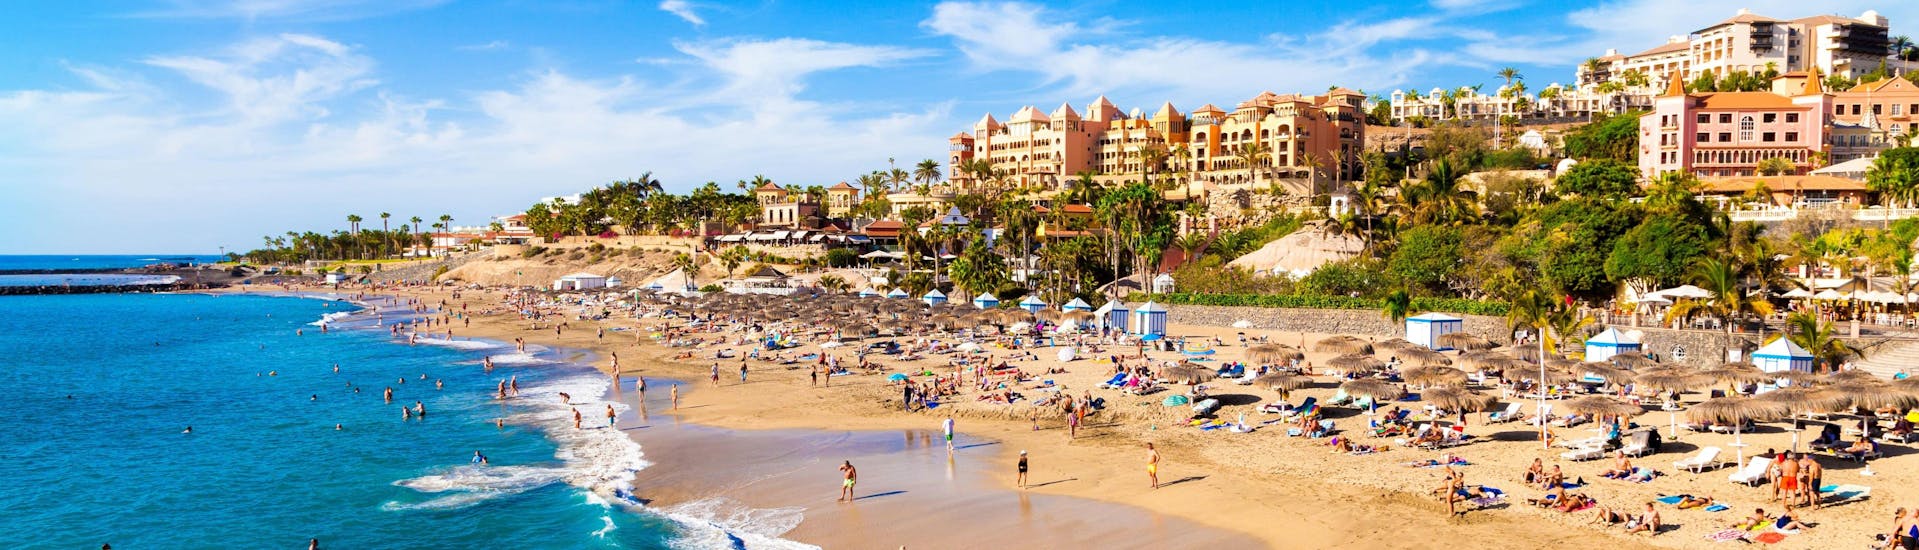 A beach in Costa Adeje, a great starting point for boat trips in Tenerife.